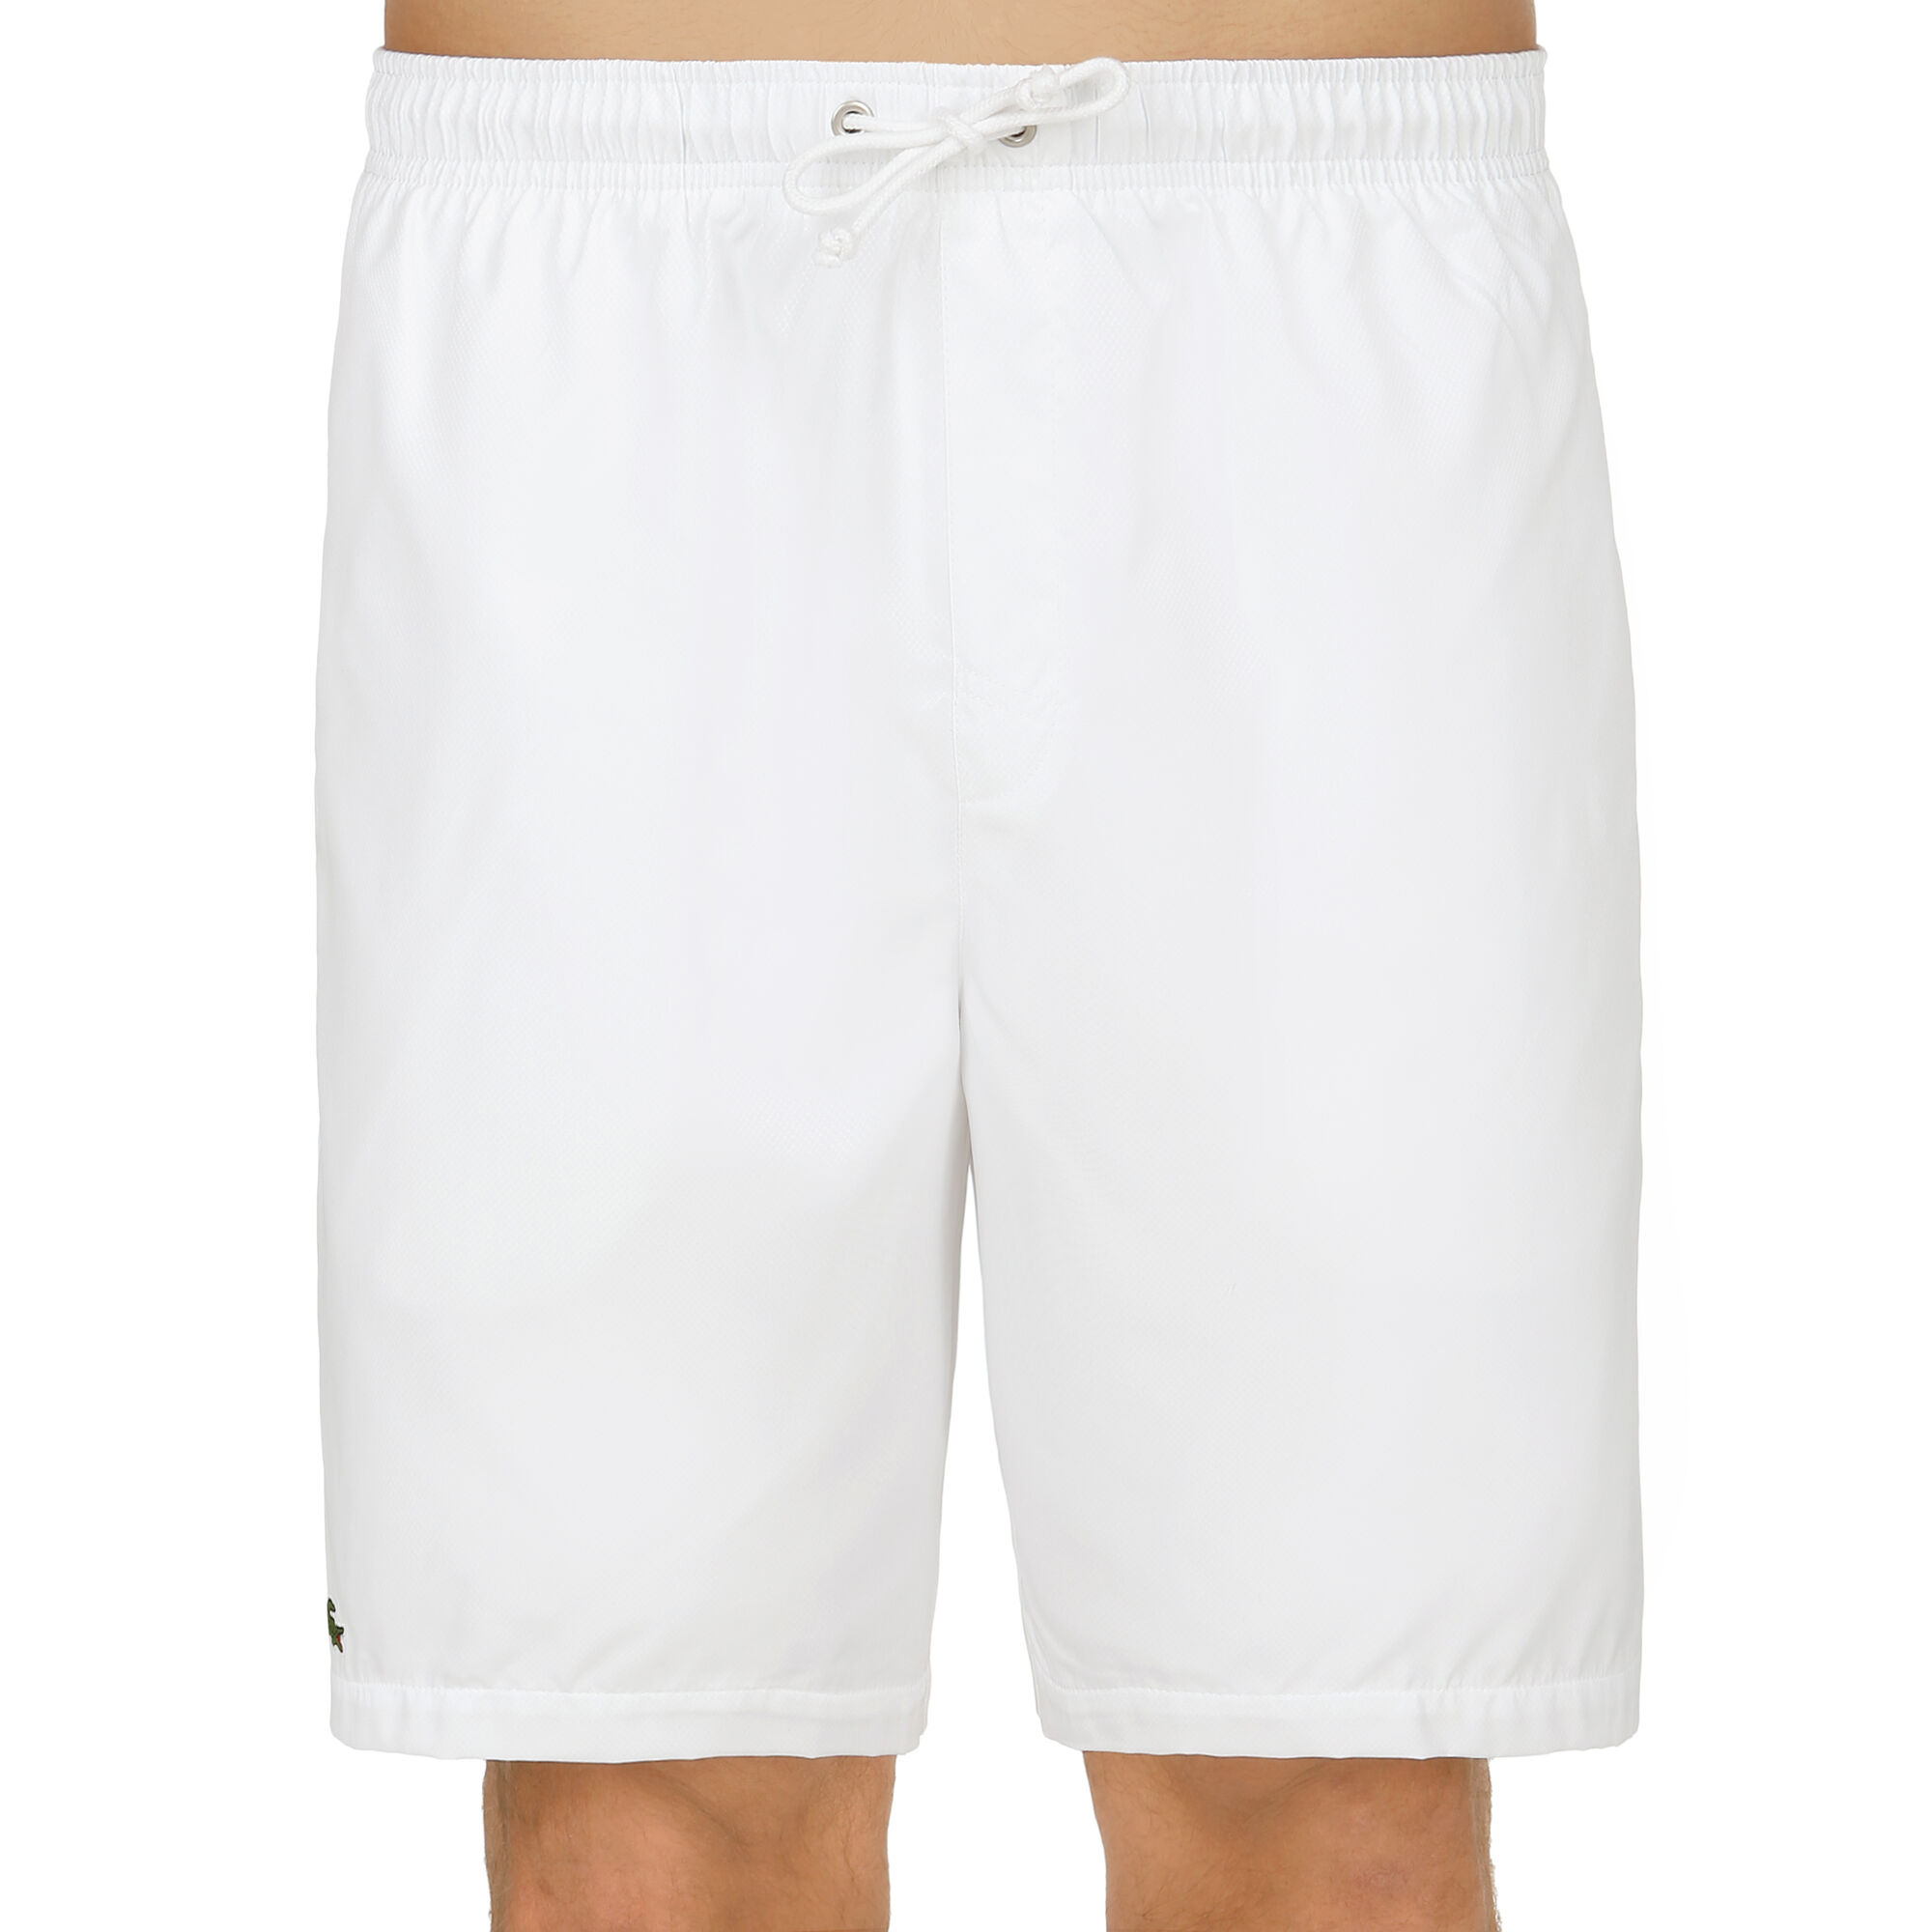 buy Lacoste Tennis Shorts - online | Tennis-Point